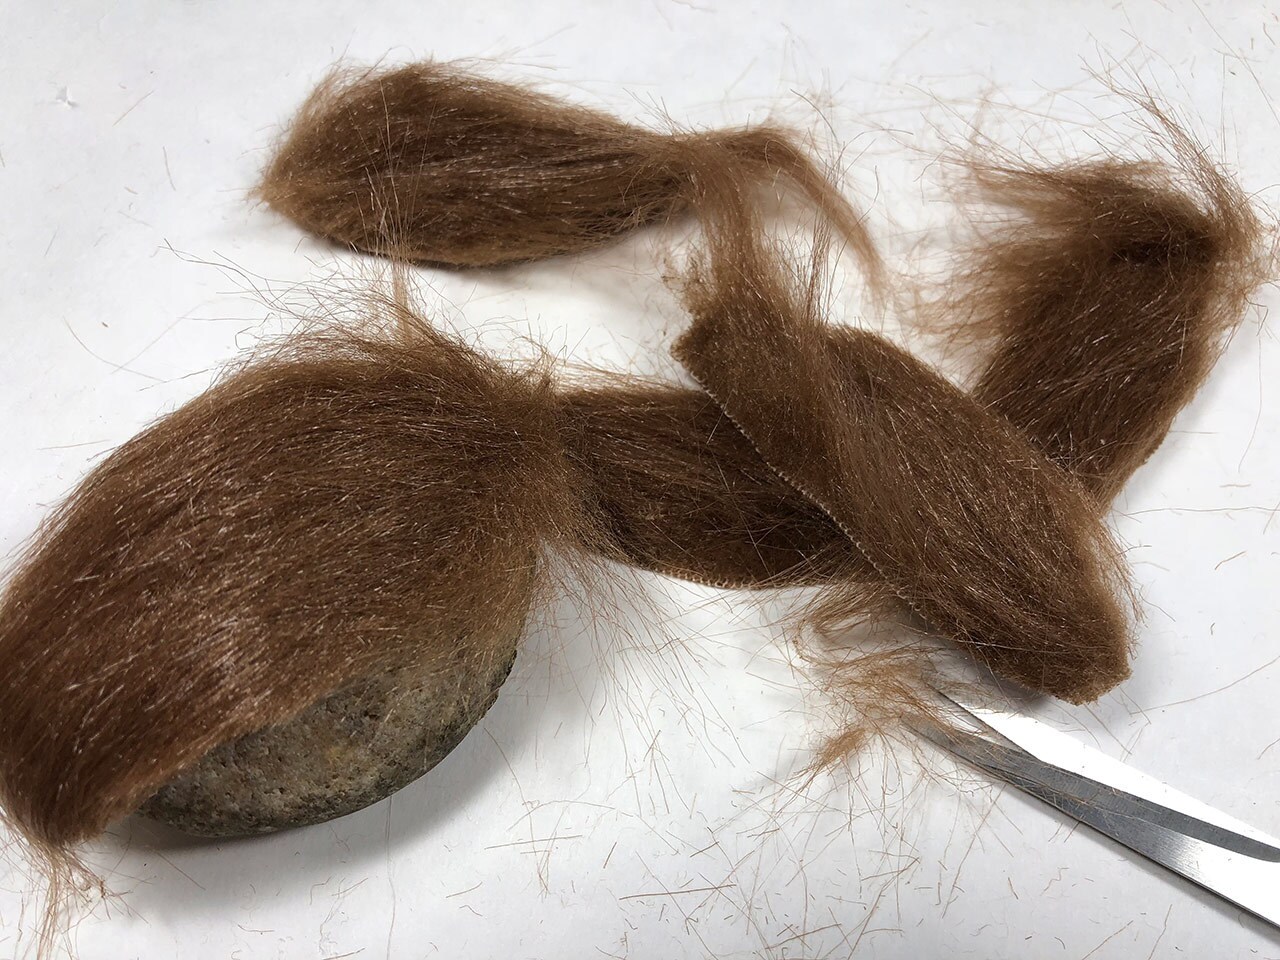 Craft fur is laid over a large stone and trimmed using scissors.